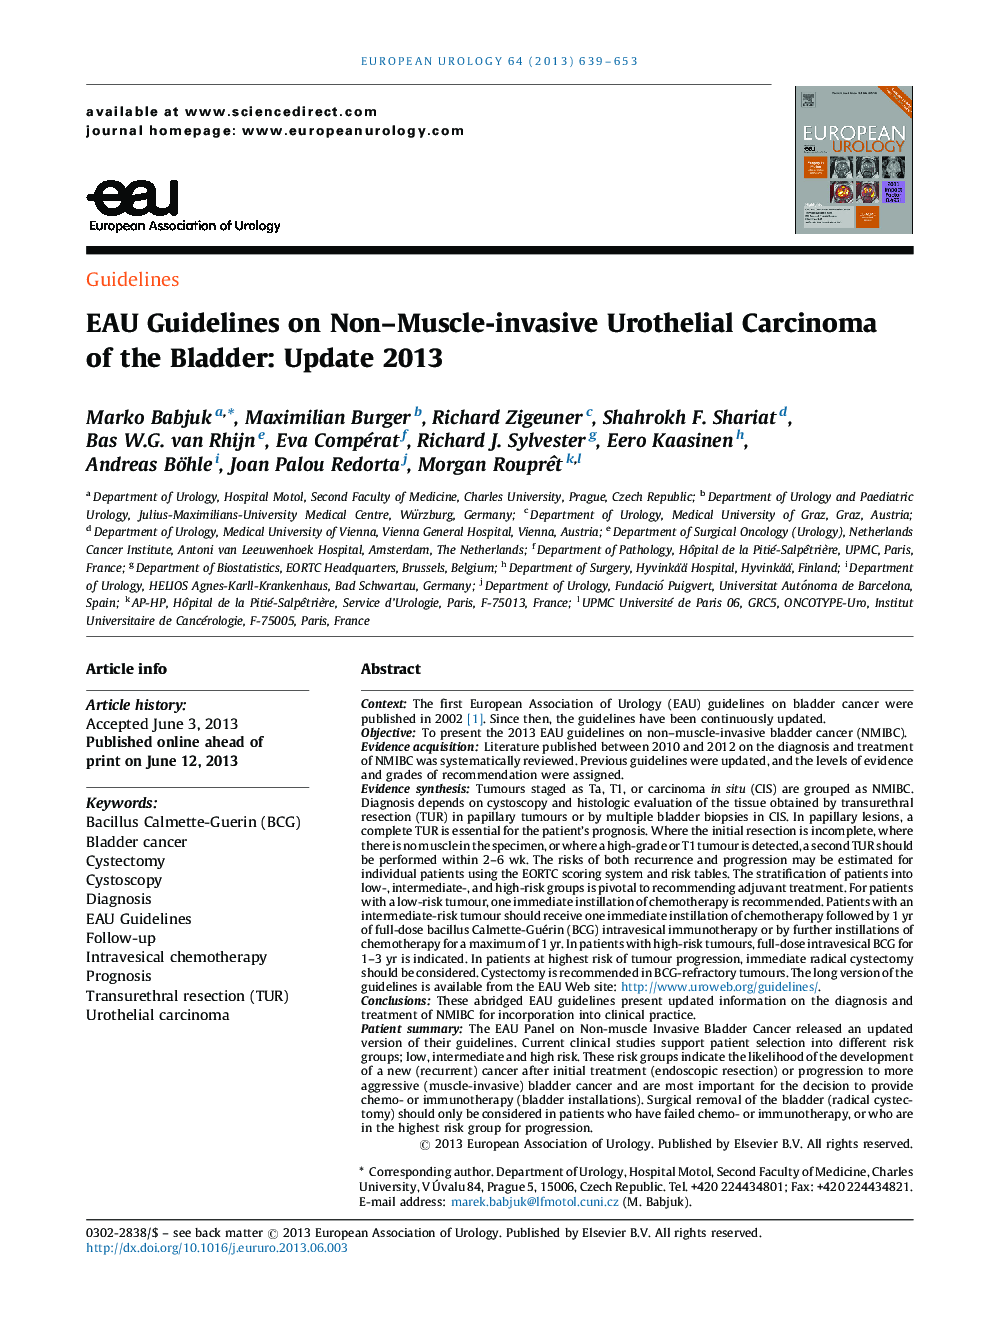 EAU Guidelines on Non–Muscle-invasive Urothelial Carcinoma of the Bladder: Update 2013